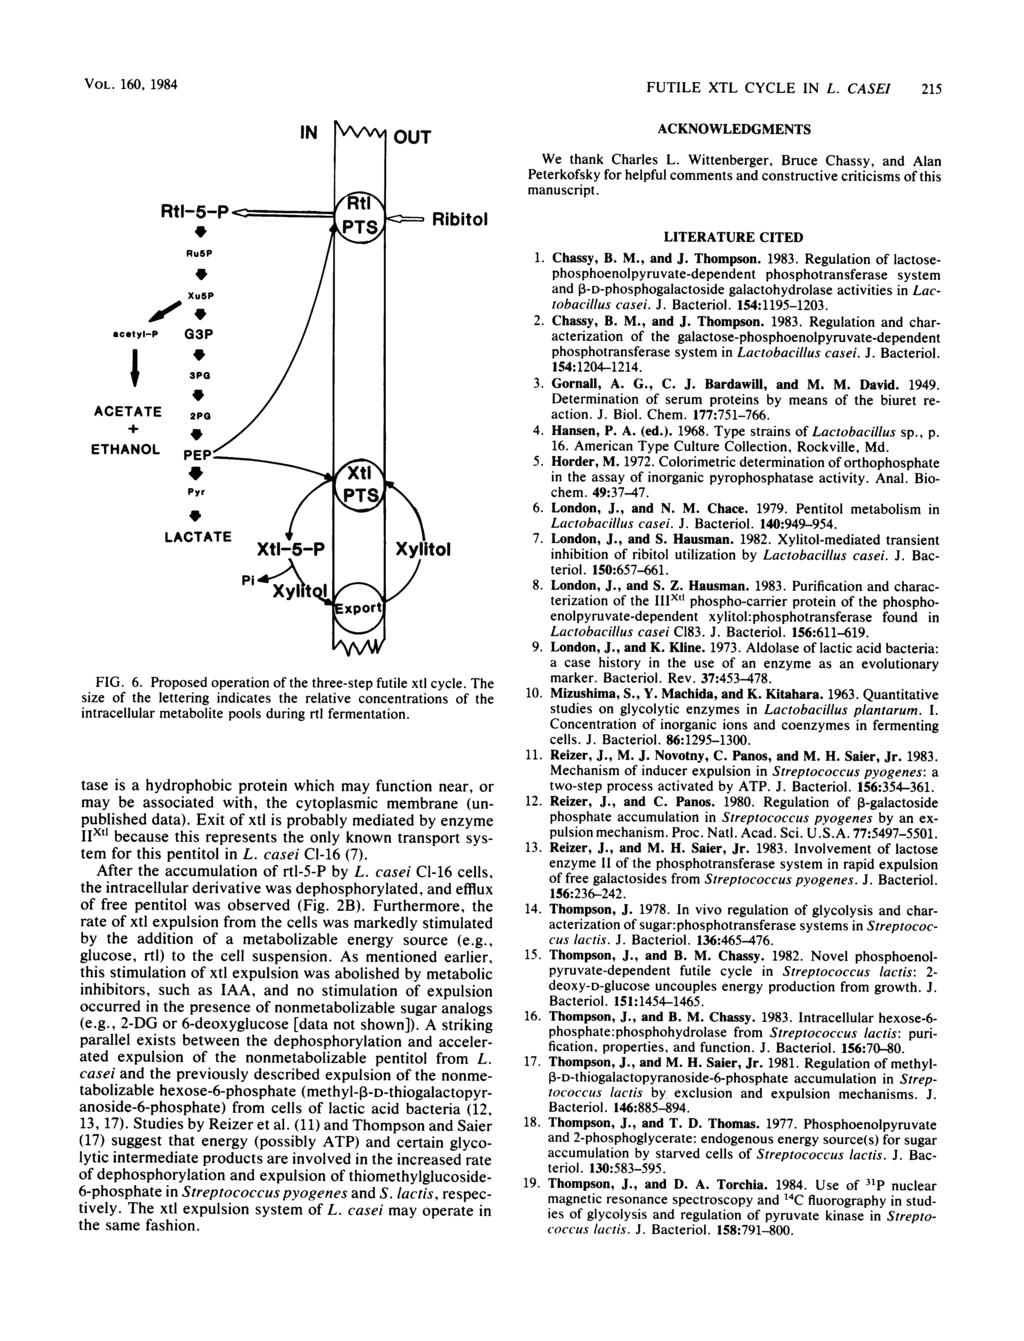 VOL. 160, 1984 acetyl-p ACETATE + ETHANOL RtI-5-P Ru5P Xu6P G3P 3PG 2PO PEP' Pyr LACTATE IN OUT Ribitol FIG. 6. Proposed operation of the three-step futile xtl cycle.